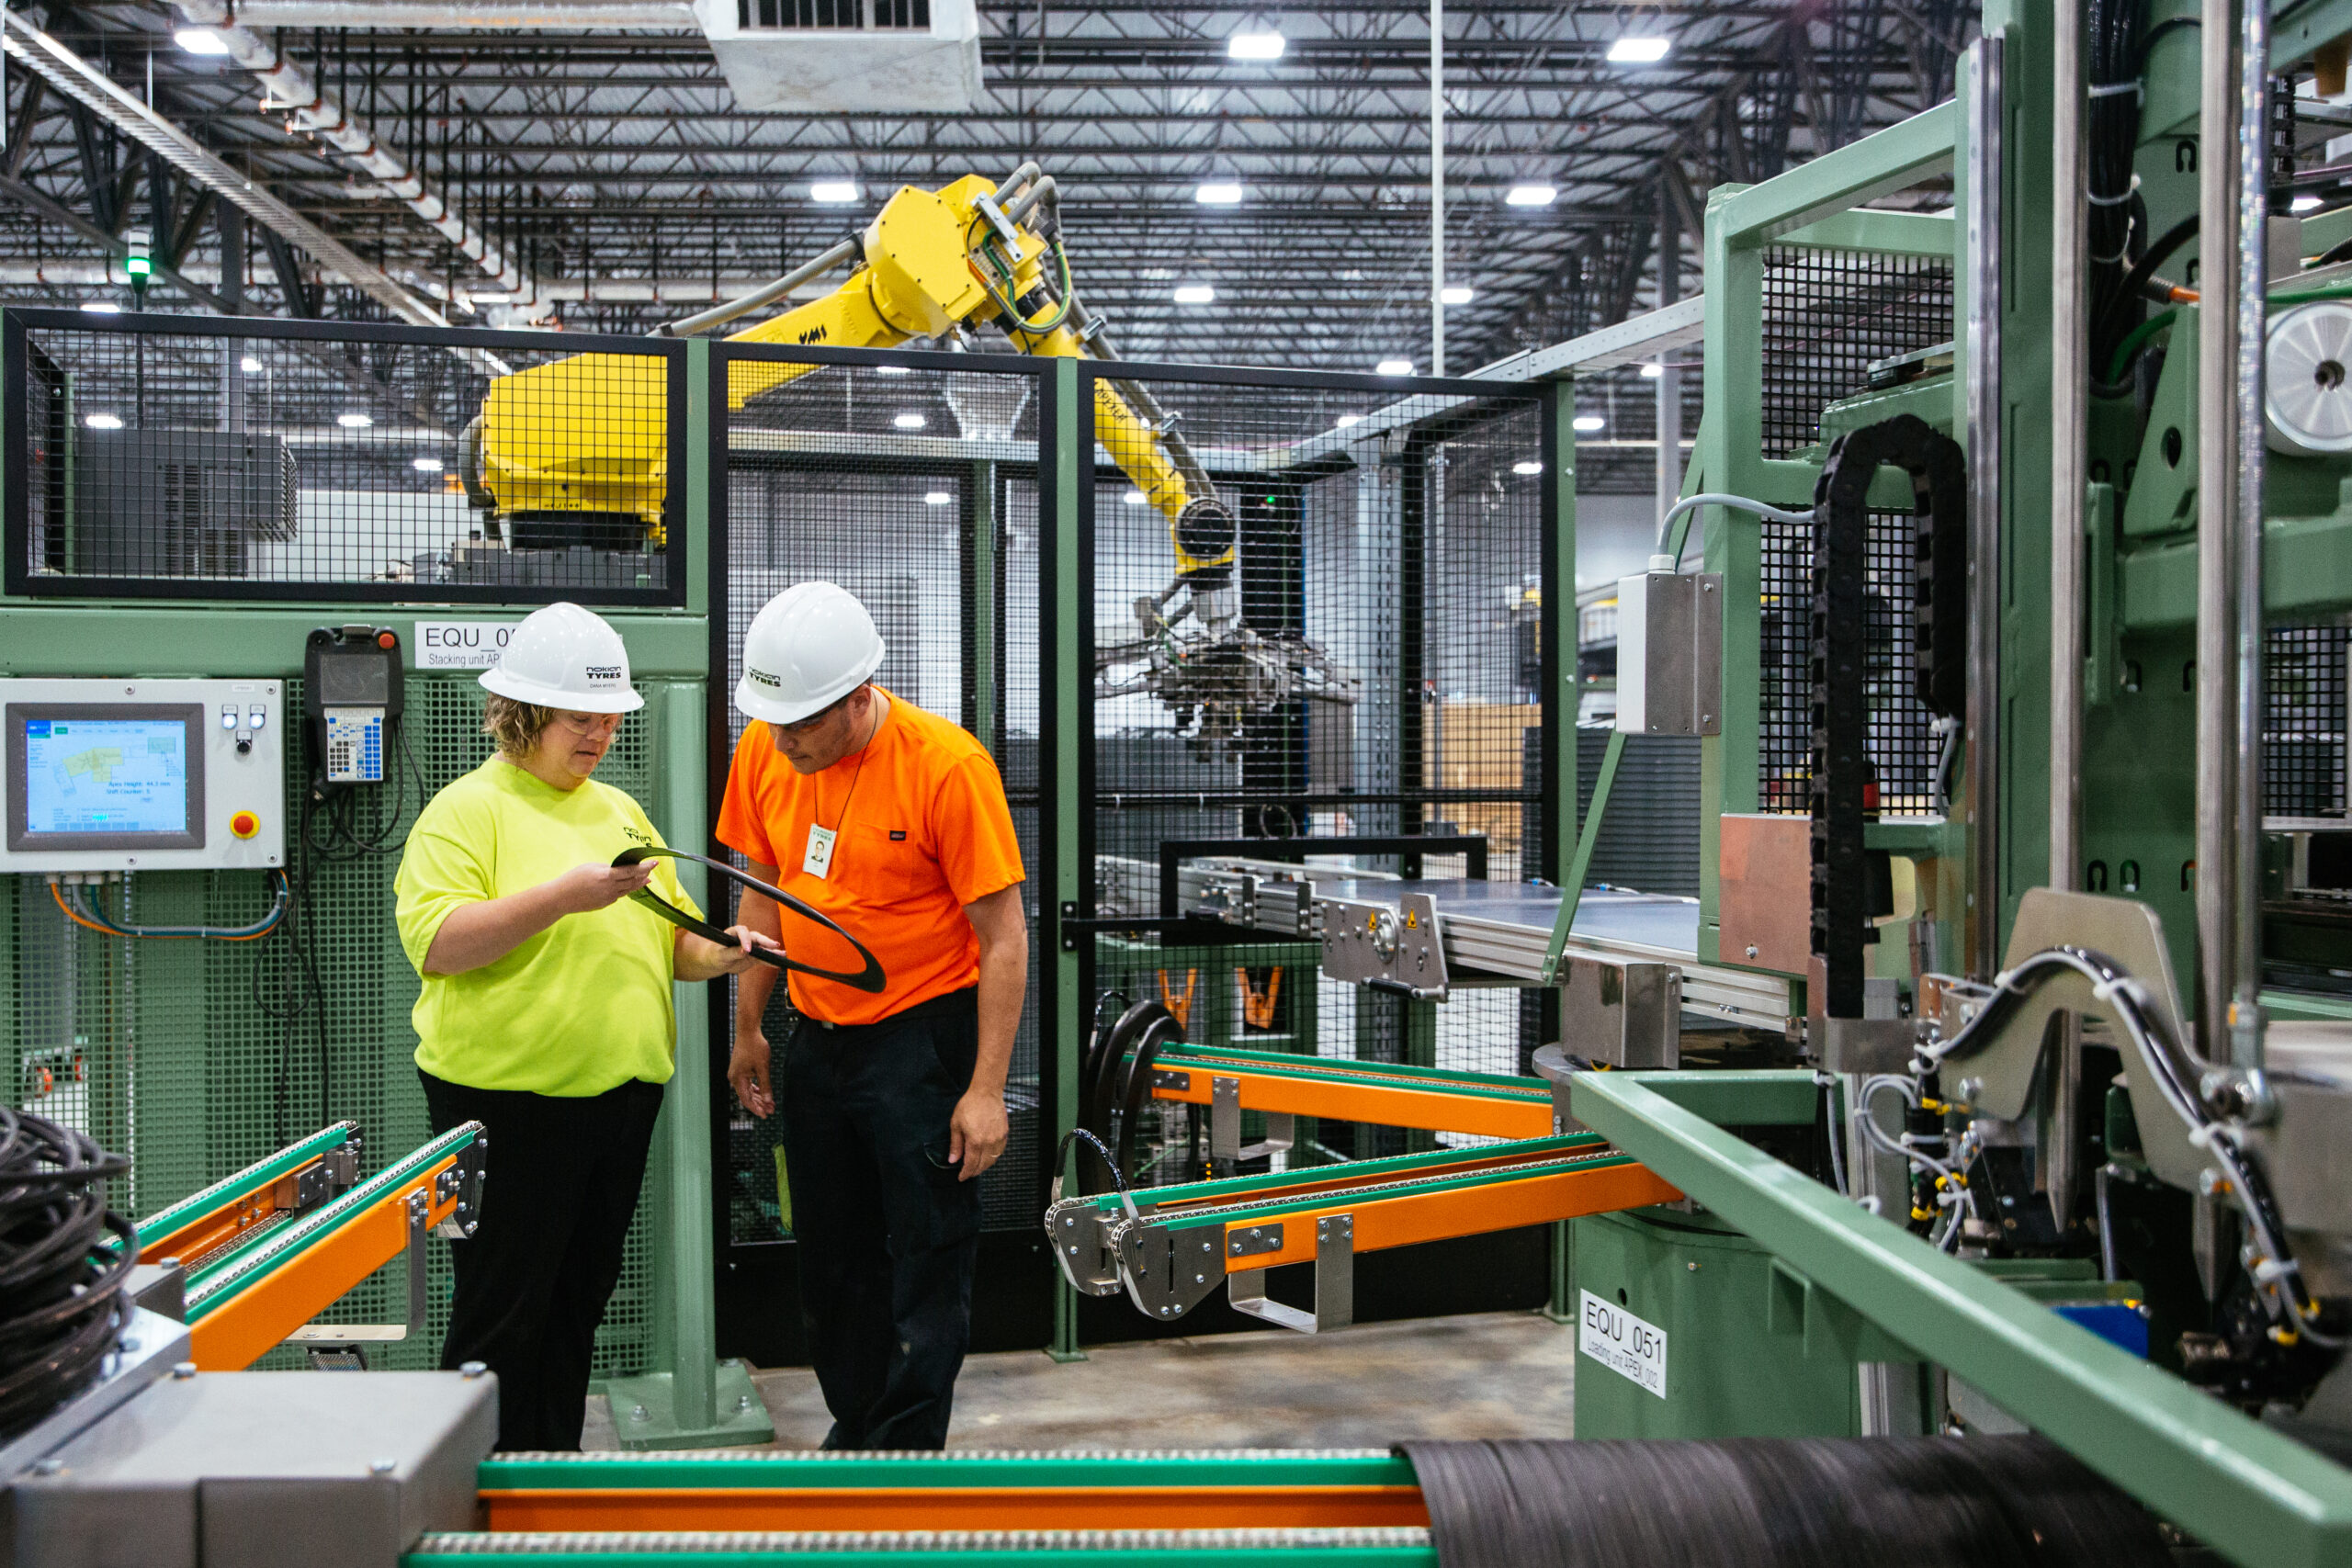 Man and woman inspect plastic ring in manufacturing setting